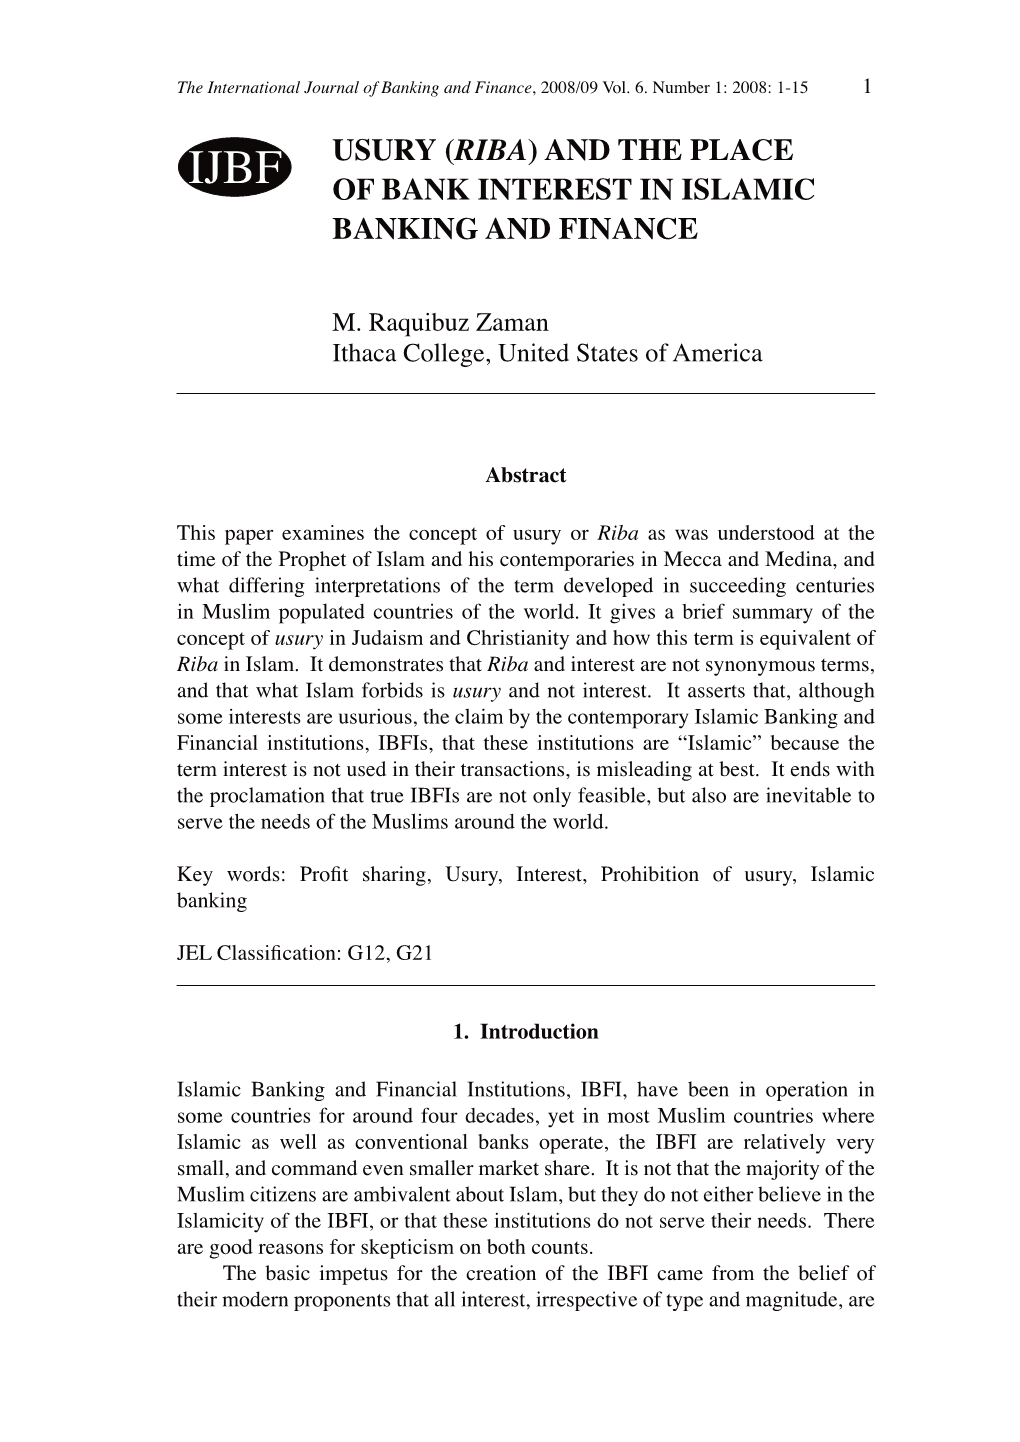 Usury (Riba) and the Place of Bank Interest in Islamic Banking And